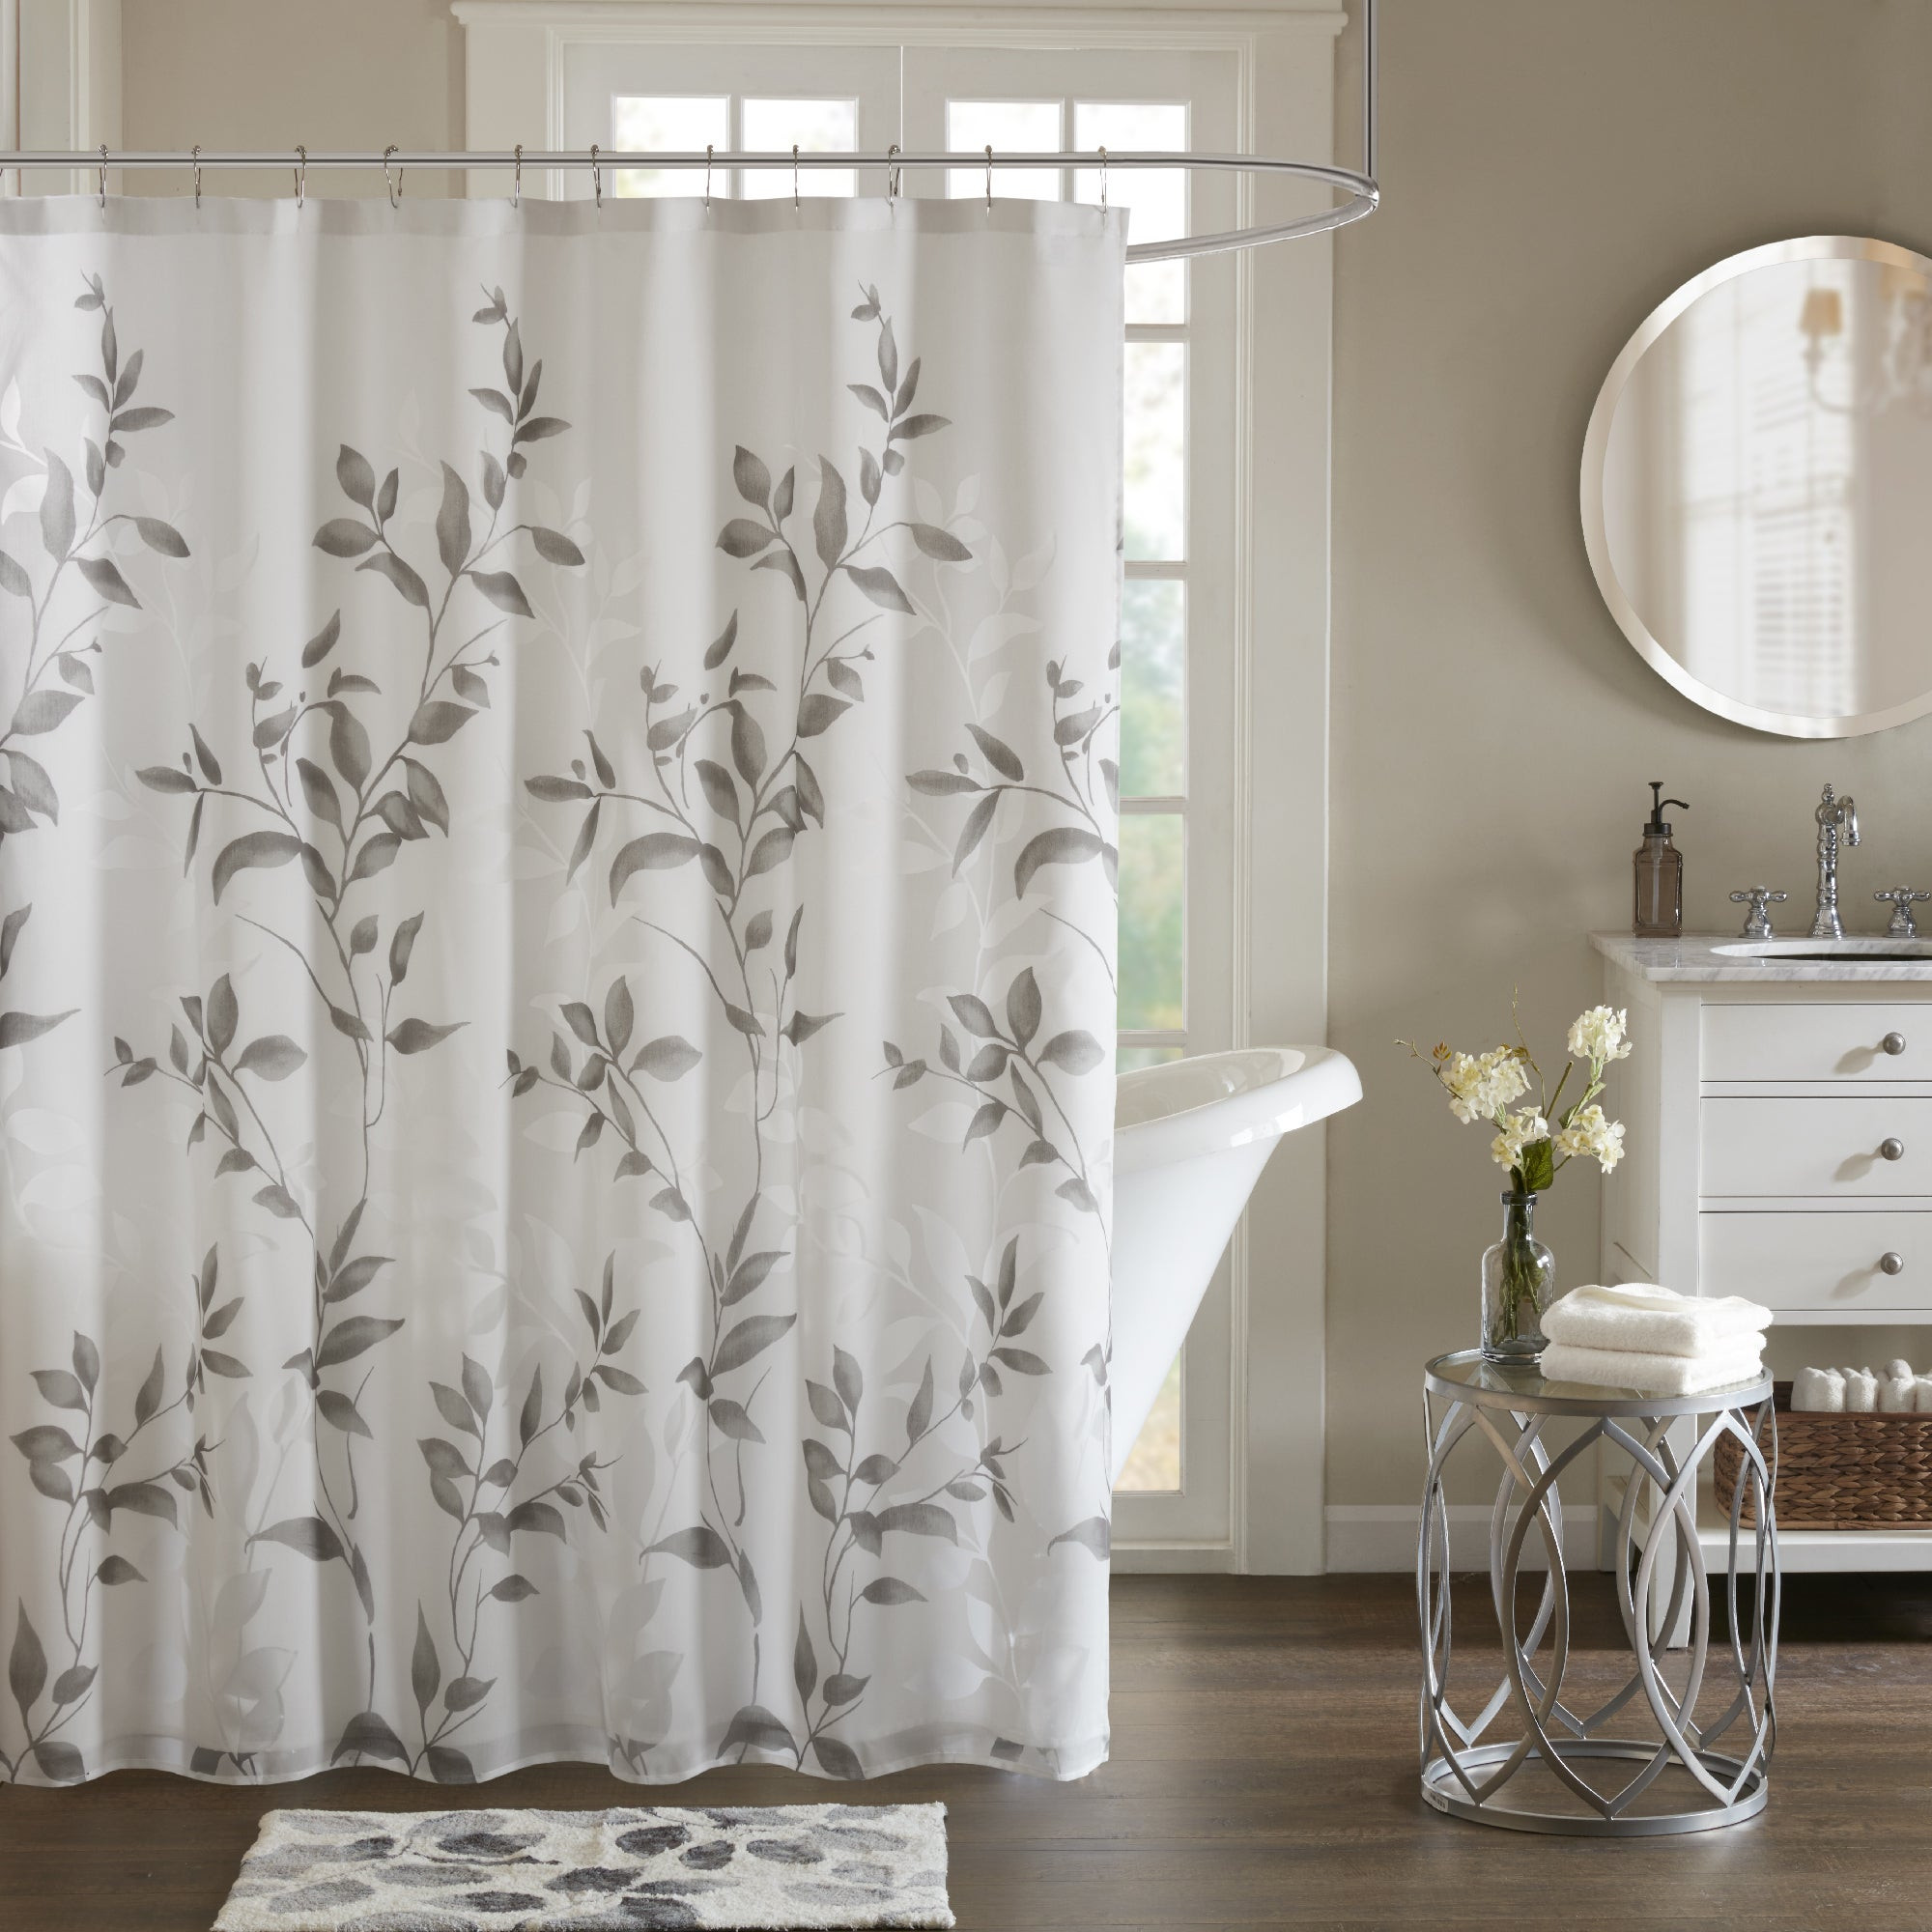 Grey Bathroom Shower Curtains Awesome Madison Park Vera Grey Printed Shower Curtain Free